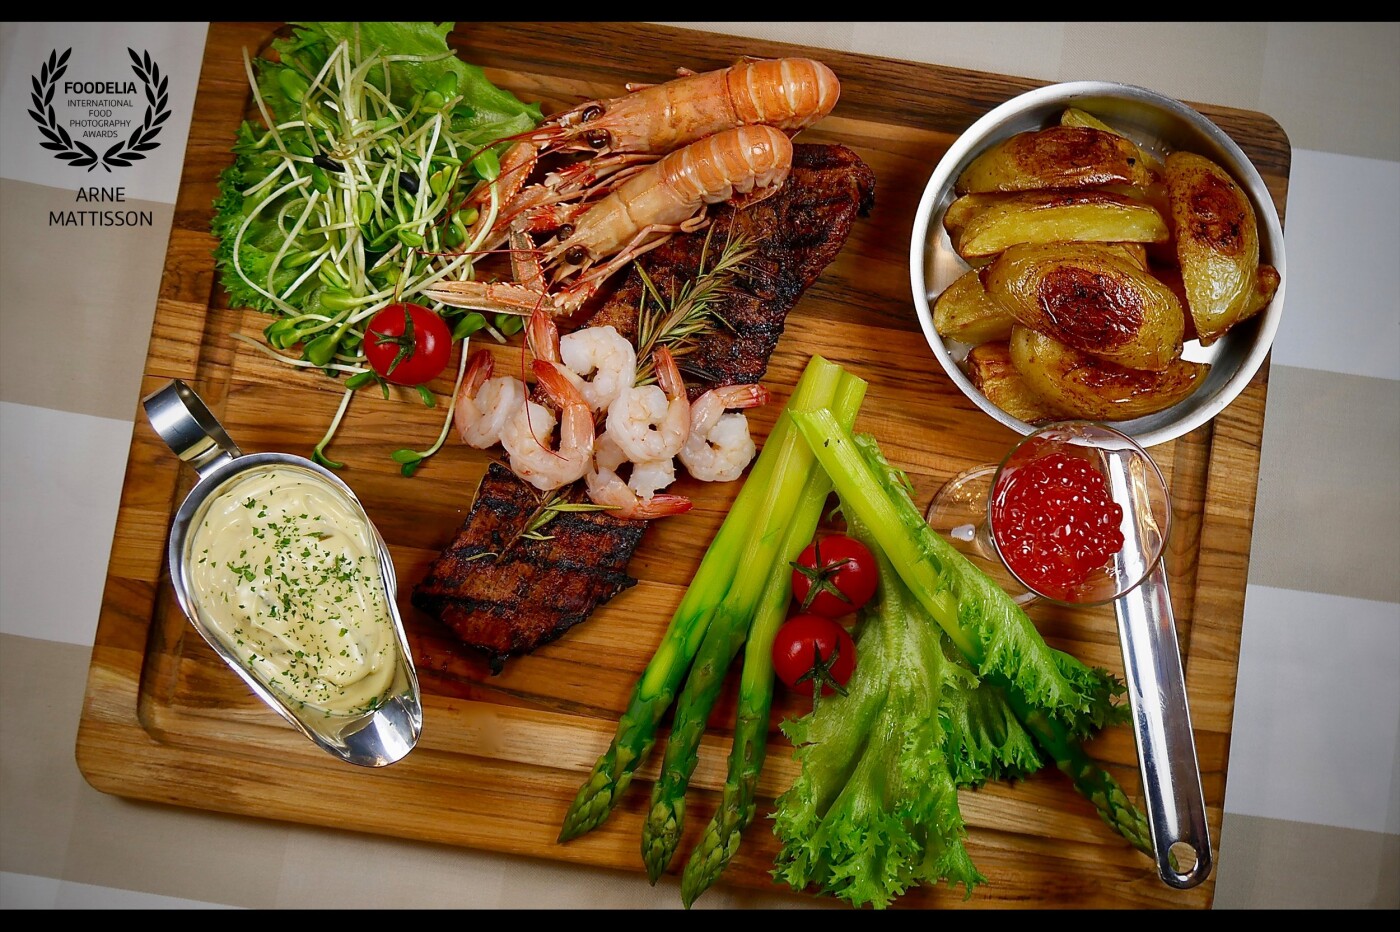 Surf and turf board including grilled pork tender loin with Bearnaise sauce, potato wedges, asparagus, shrimps and crawfish and of course one shot of salmon roe. My motivation is passion. I prepare all of the dishes by myself and after that it's a challenge to take the pic because I normally have a few minutes to take the pic before I have to eat it.<br />
Instagram: @arnesmat<br />
Homepage: www.arnesmat.se